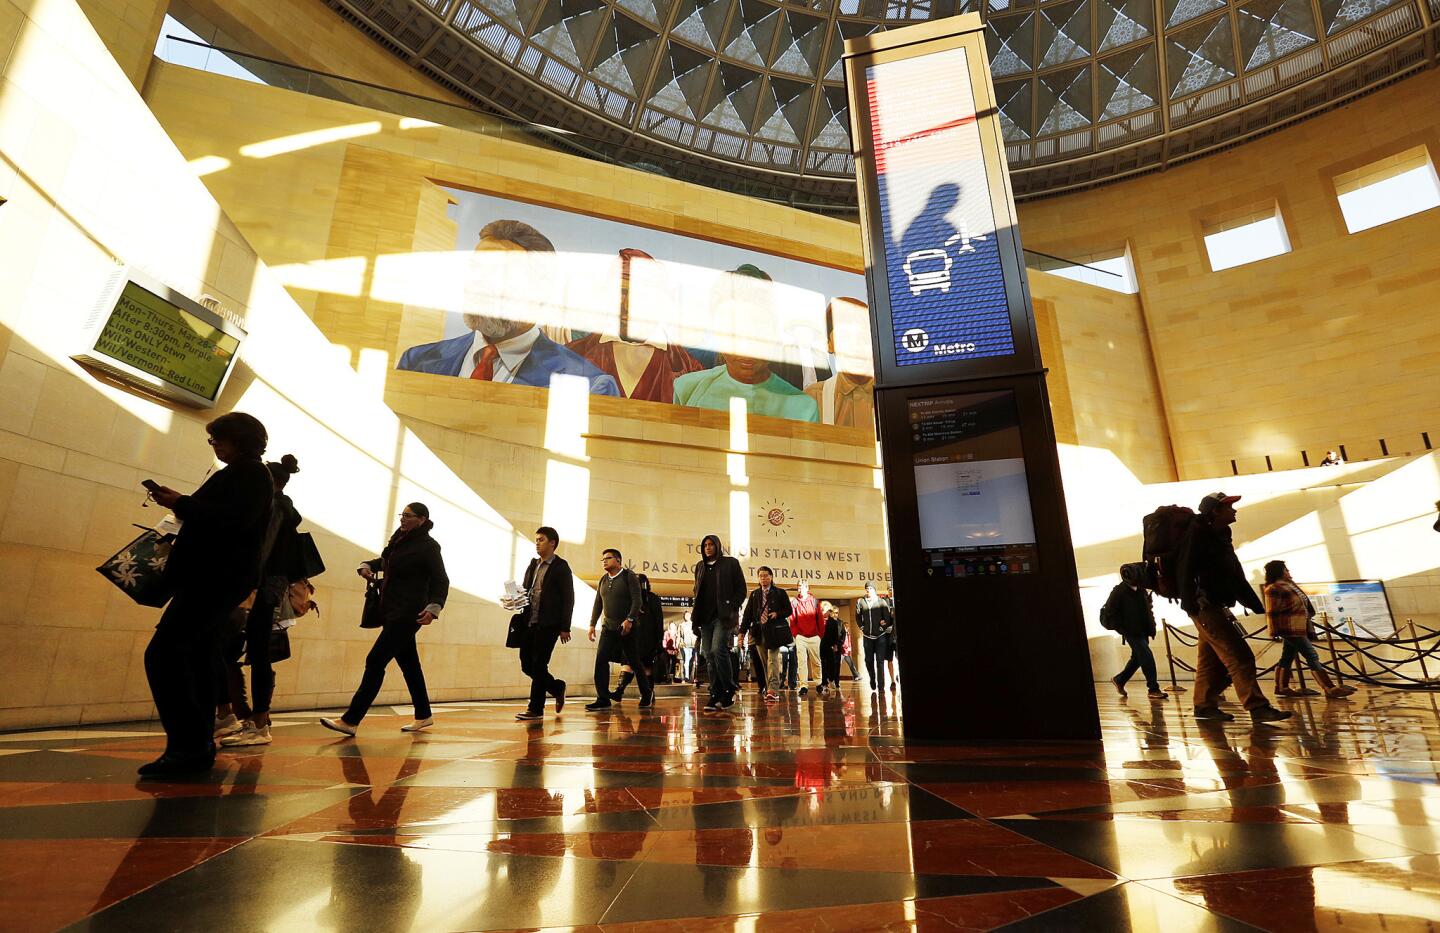 Passengers pass the new information kiosk in the Patsaouras Transit Plaza at historic Union Station, which officials hope to expand from a transit hub to more of an urban destination.